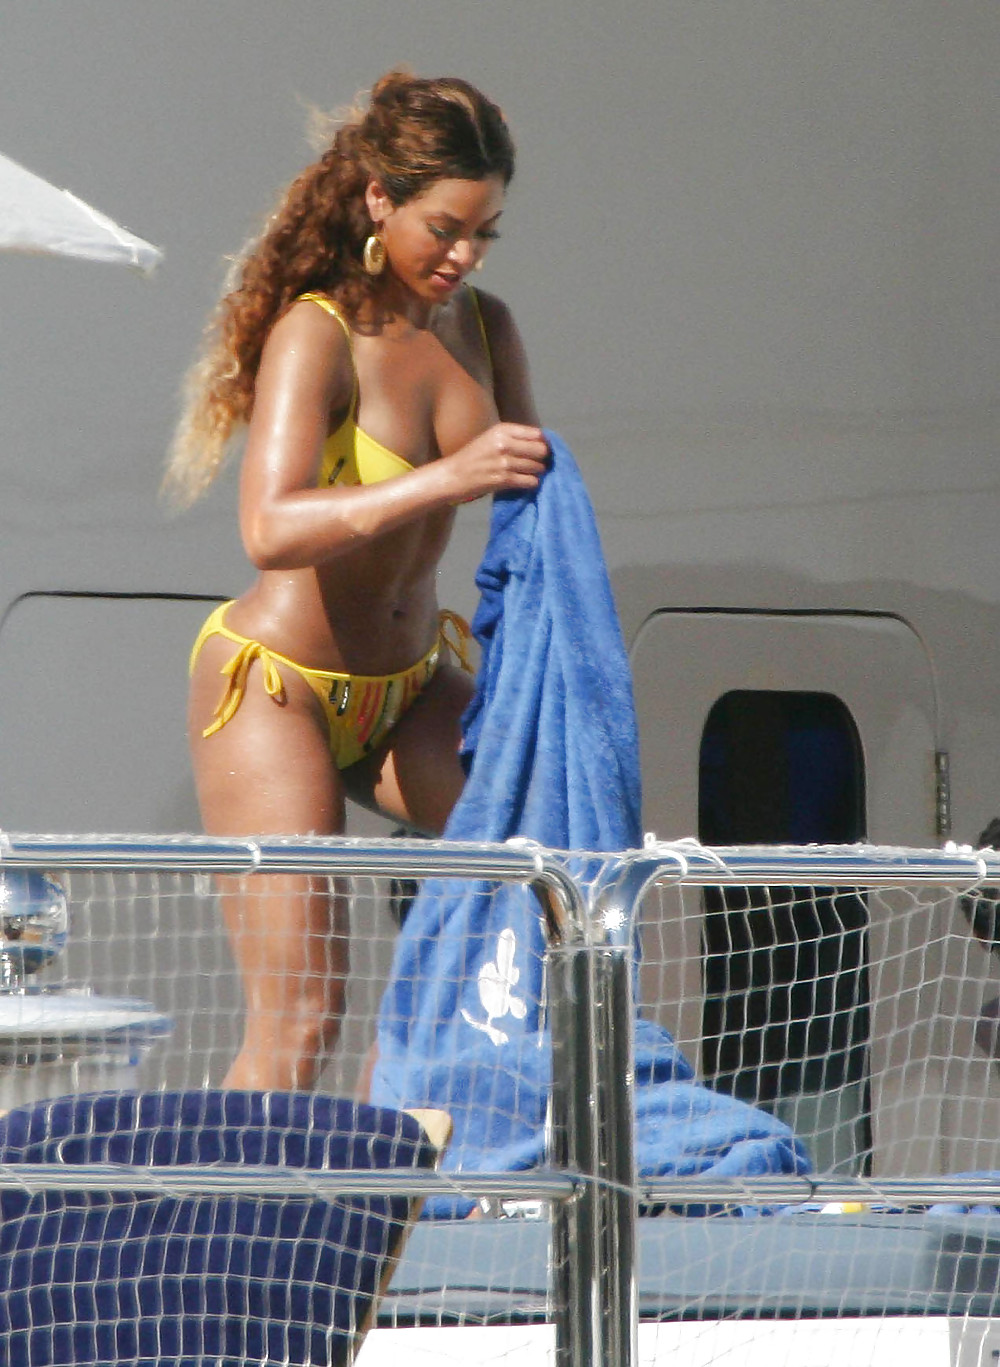 Beyonce cette grosse pute i want her boobs and her ass #19844328